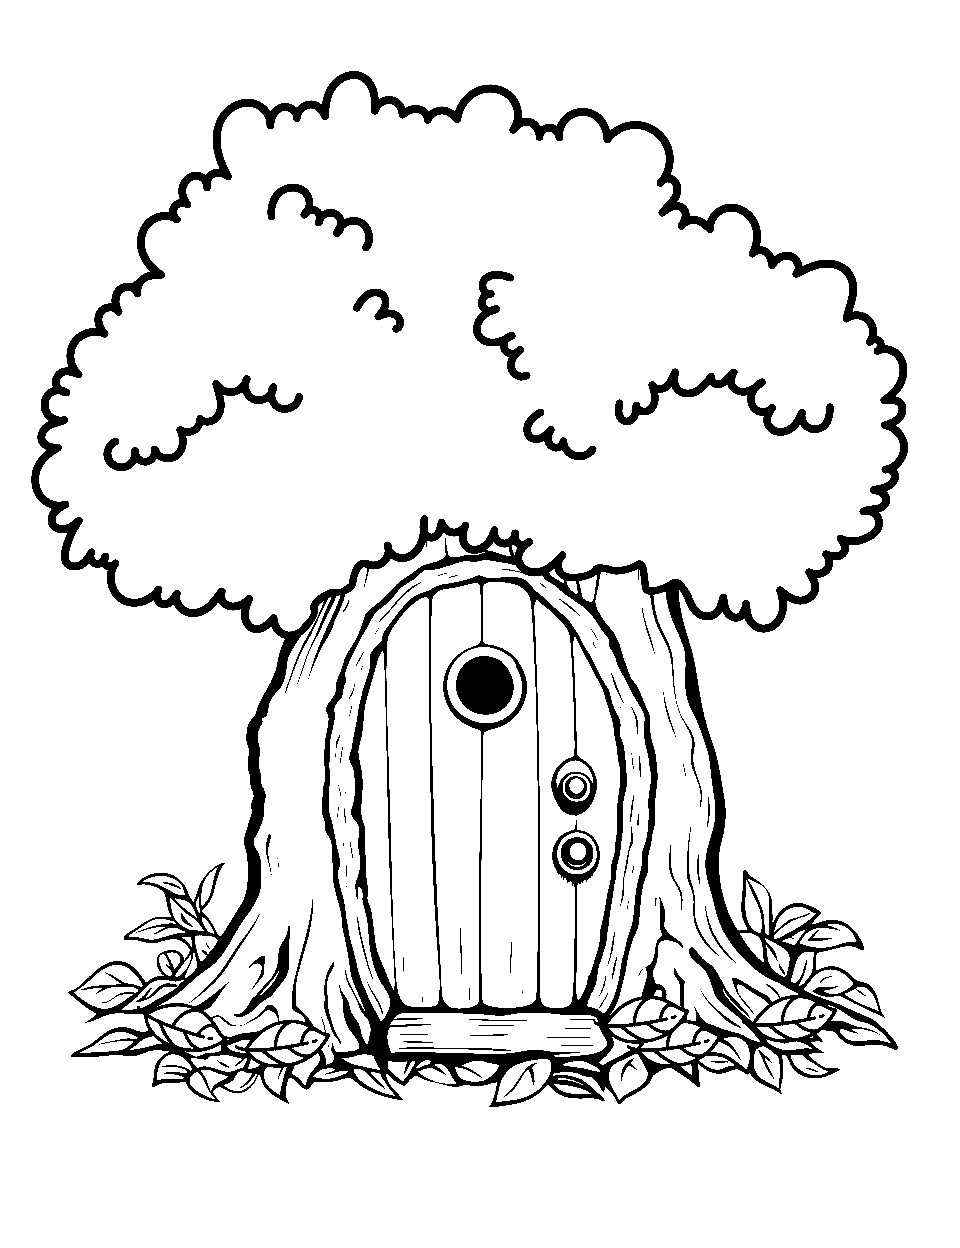 Mysterious Leprechaun Door Coloring Page - A tiny, ornate door at the base of a tree, hinting at a leprechaun’s home.